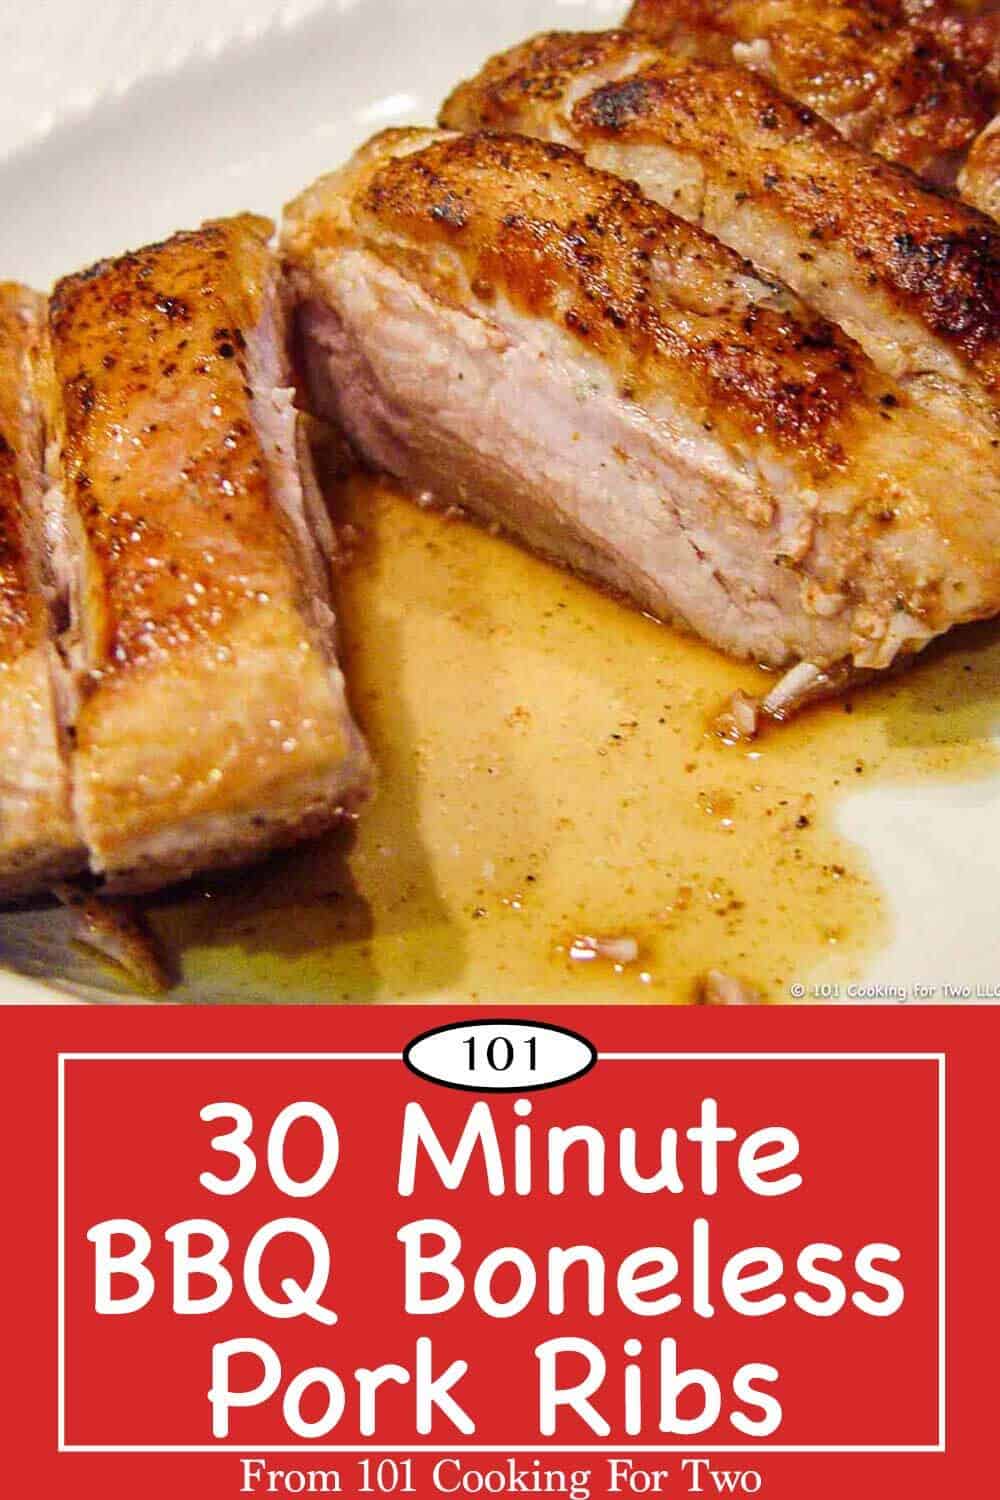 30 Minute BBQ Boneless Pork Ribs | 101 Cooking For Two